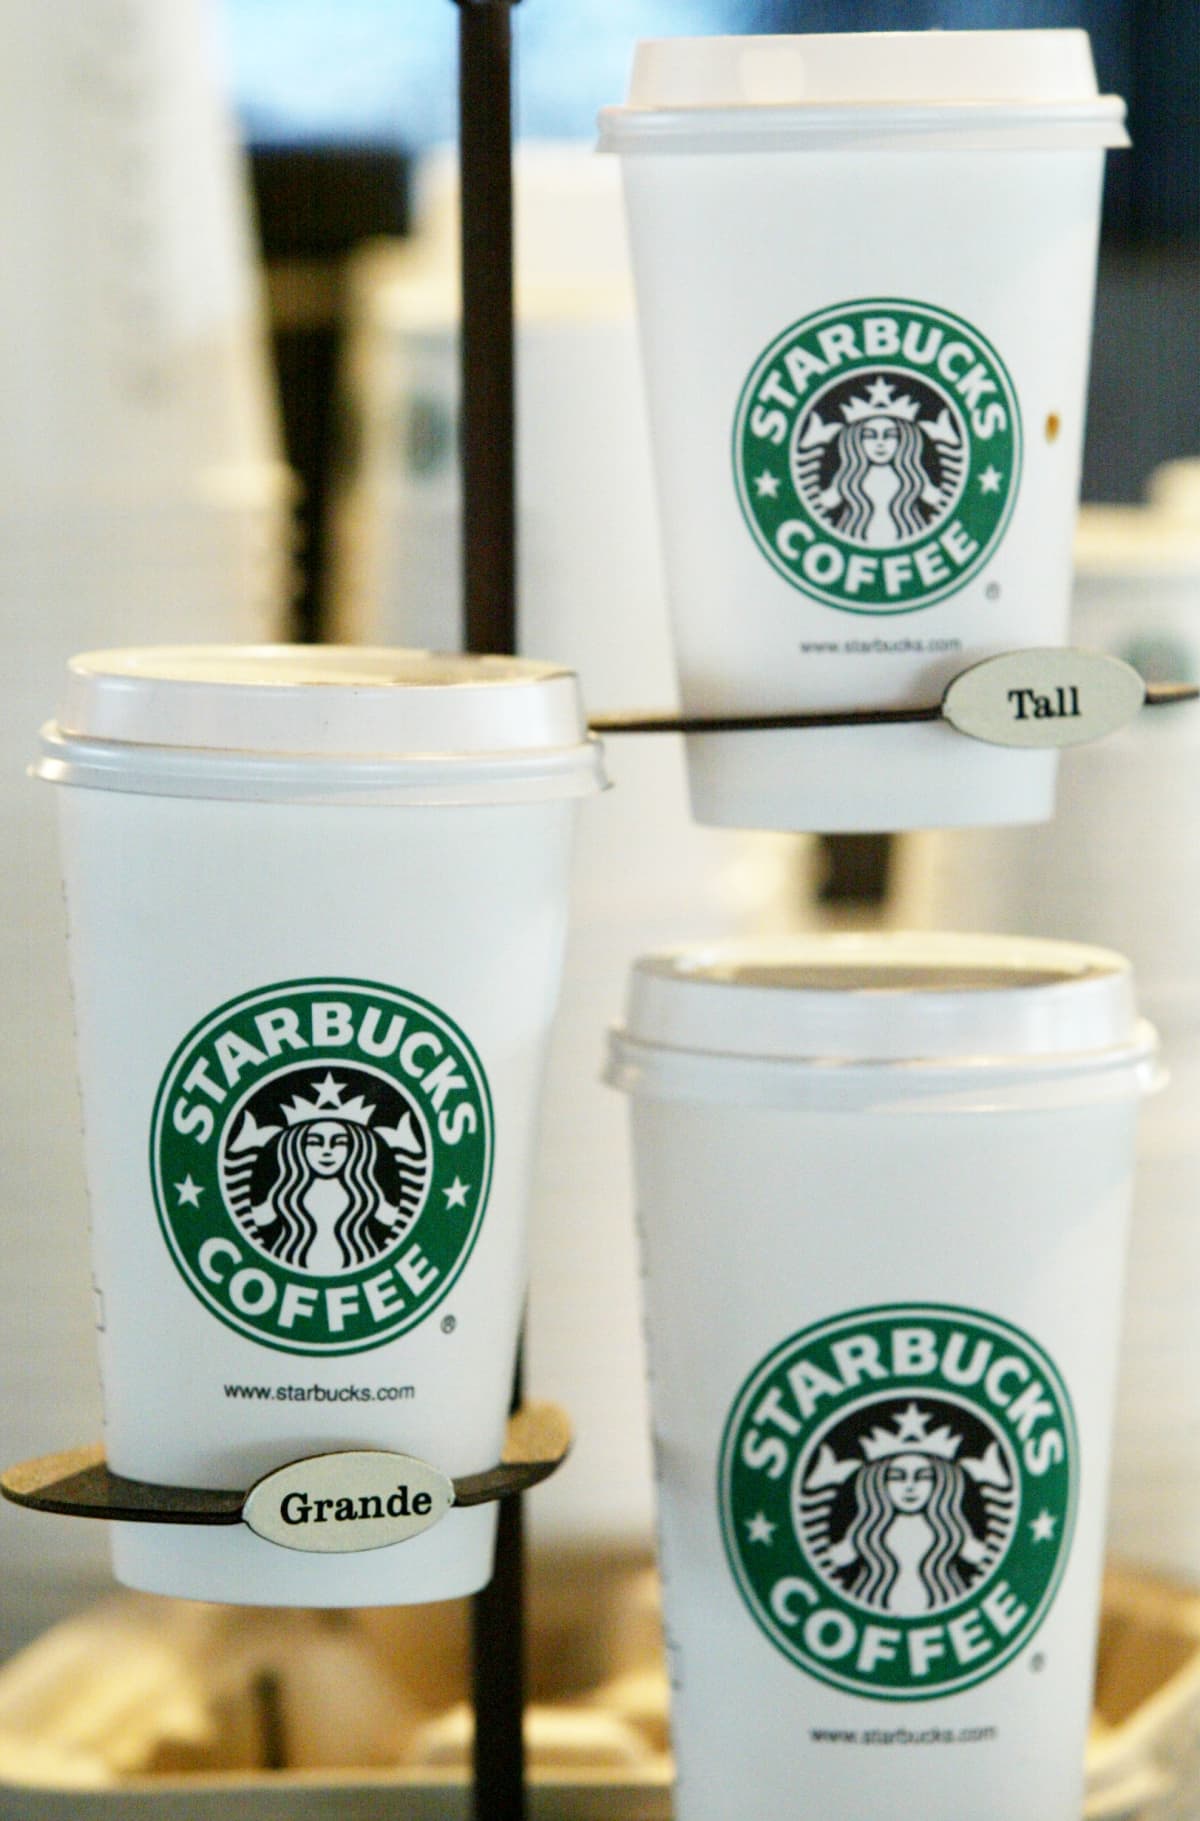 Starbucks coffee cups of different sizes on display.